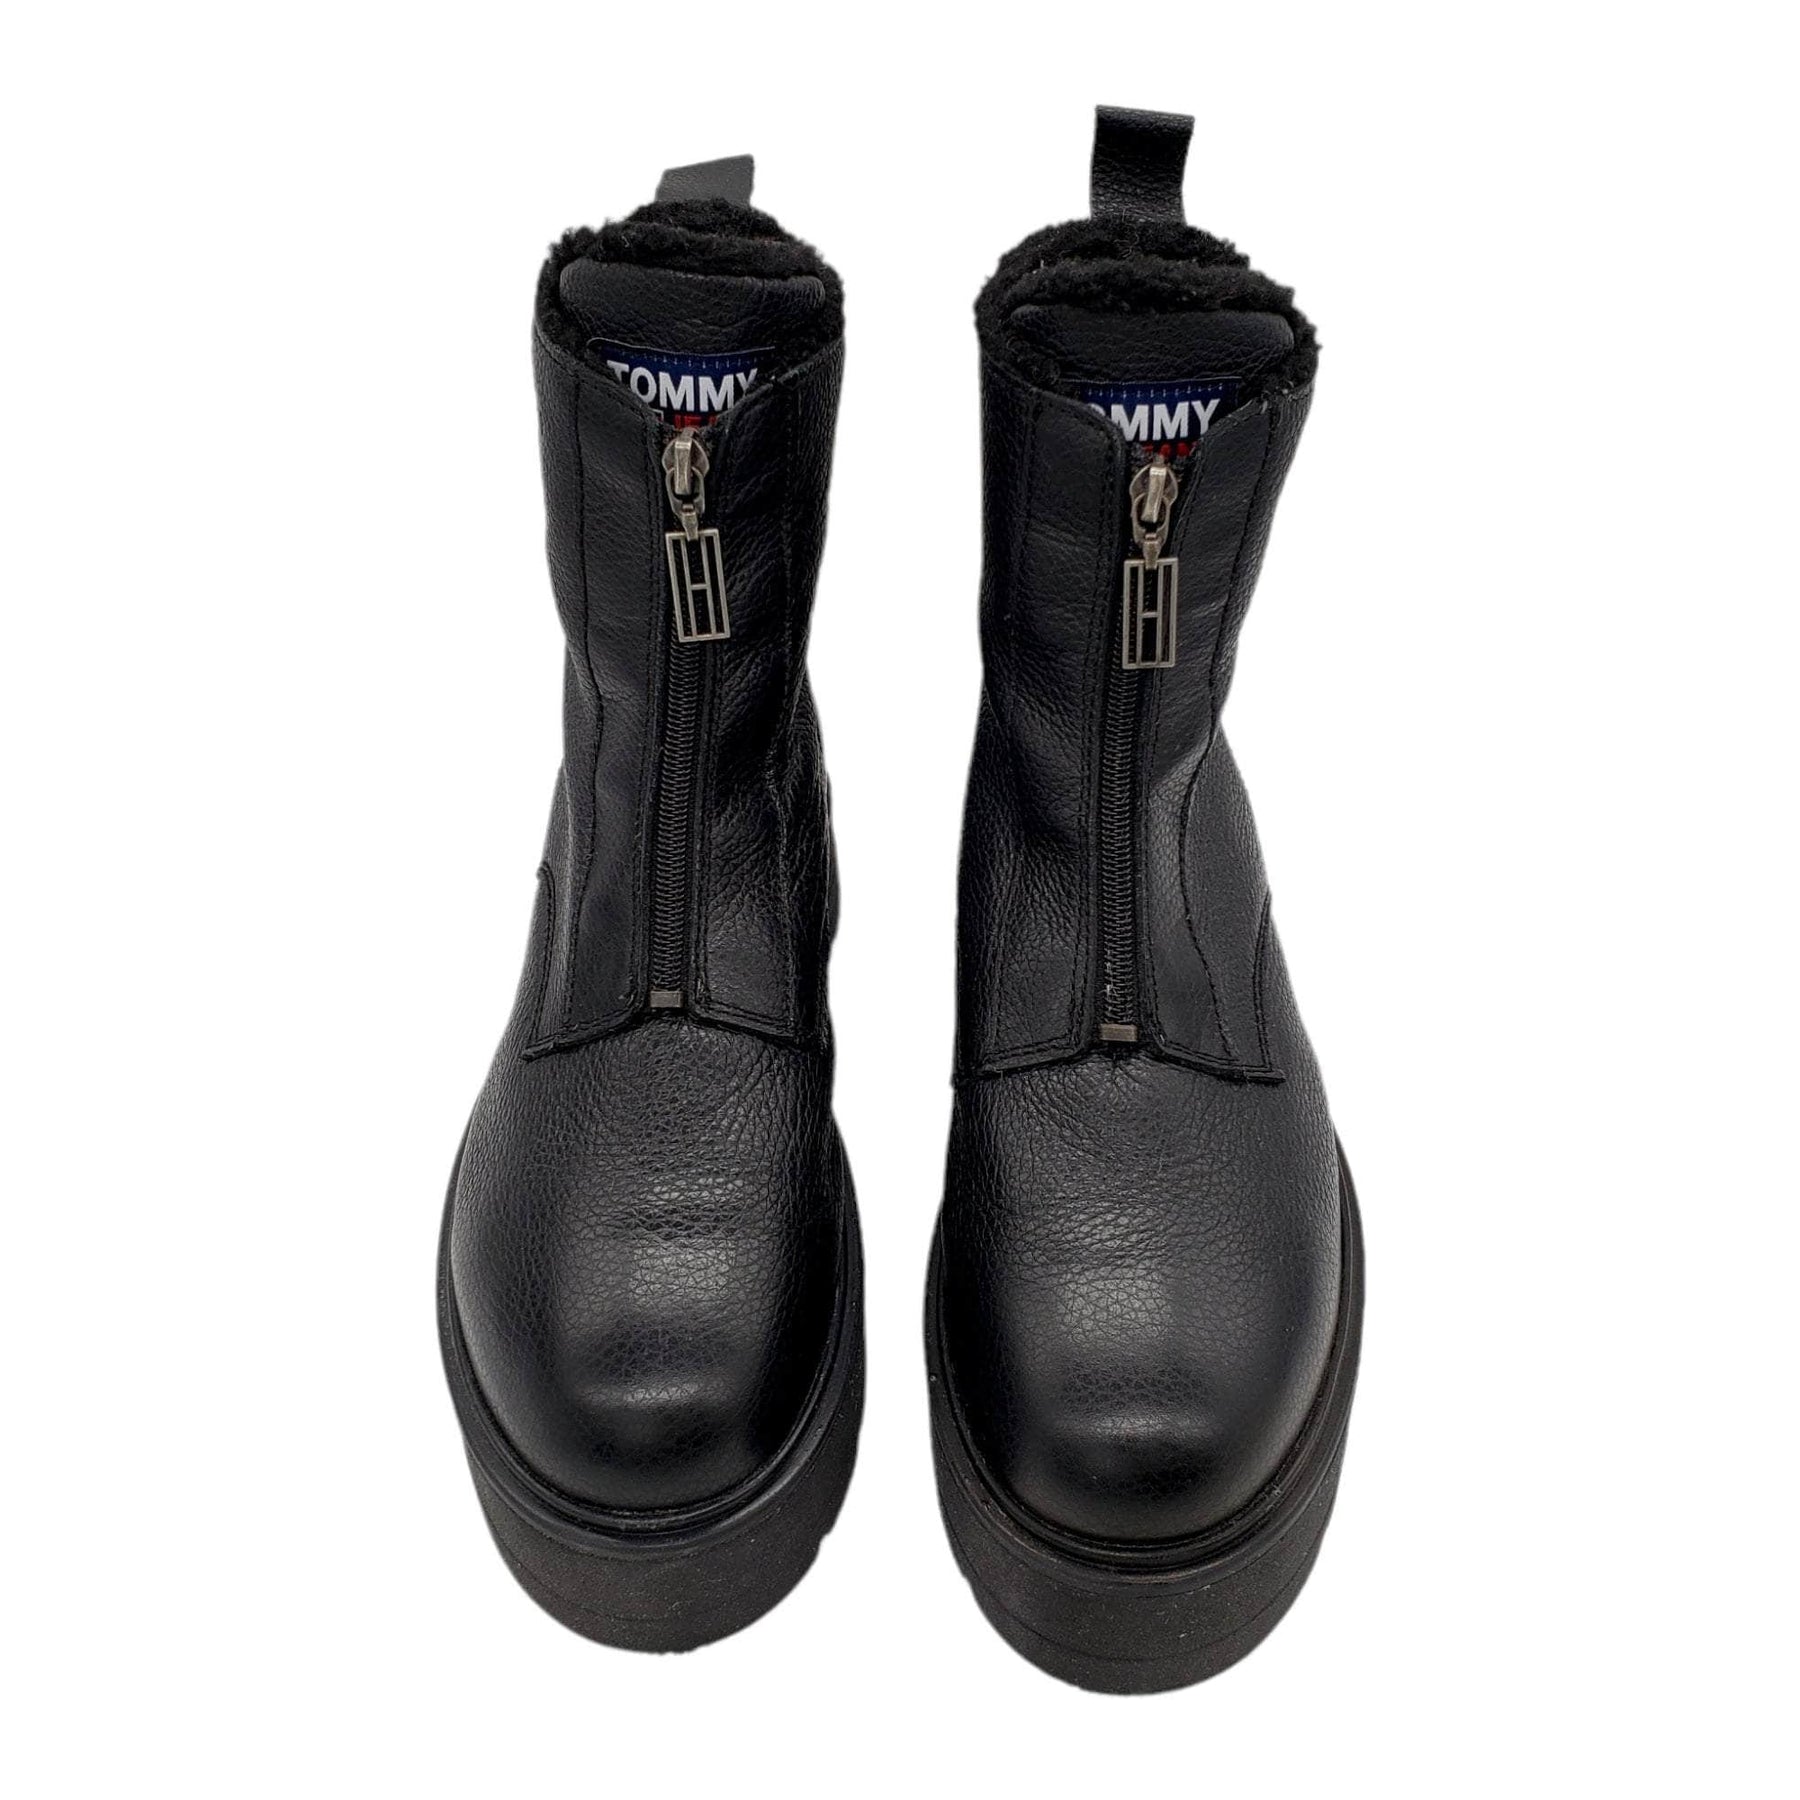 Tommy Hilfiger Black Leather Warmlined Chunky Boots